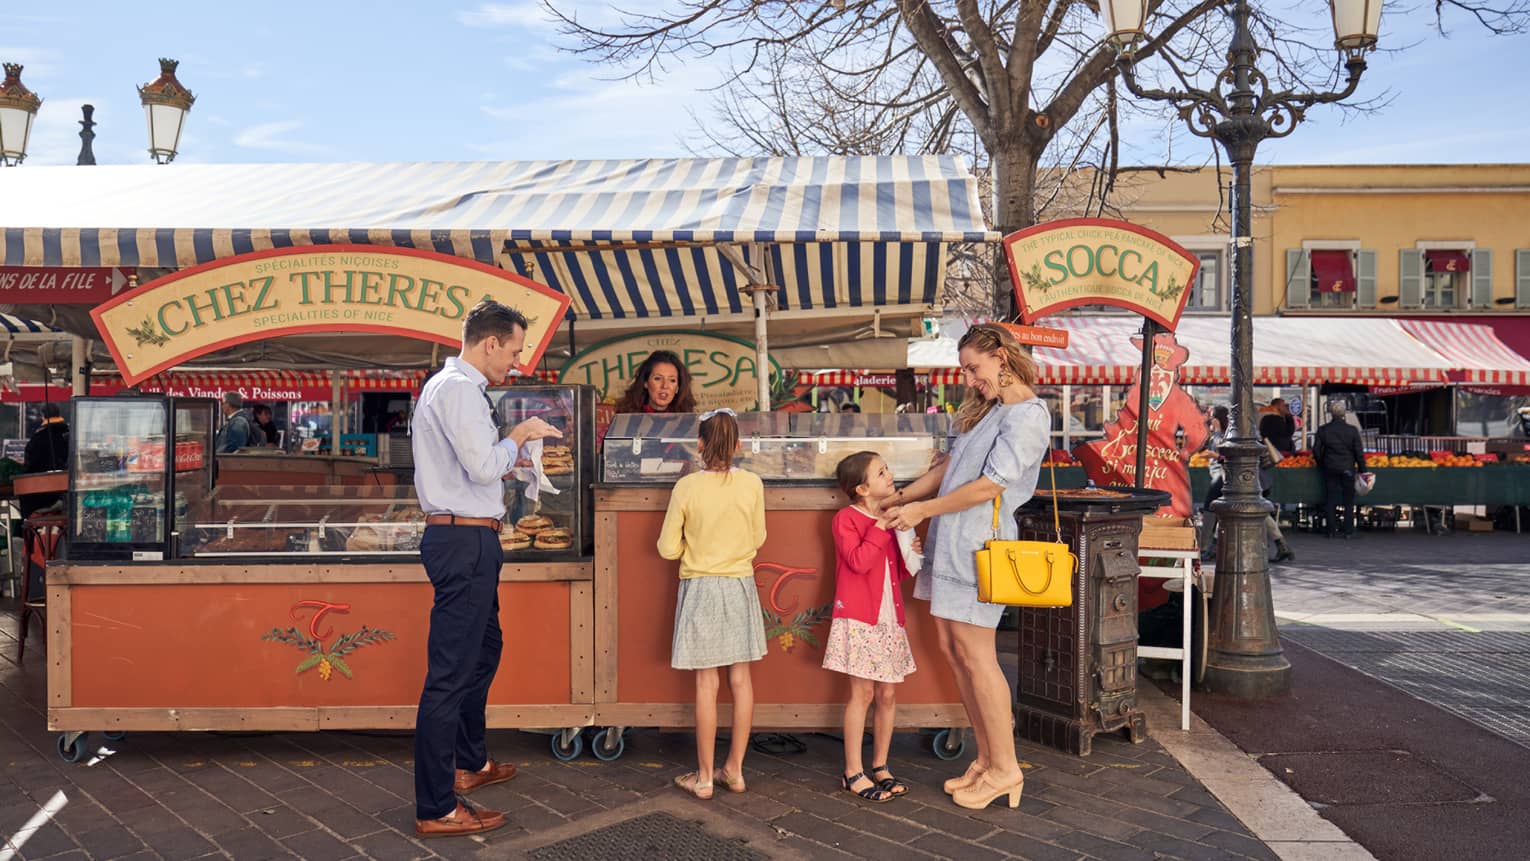 Man in blue shirt, black pants with two girls and woman in dresses at market farm stand)